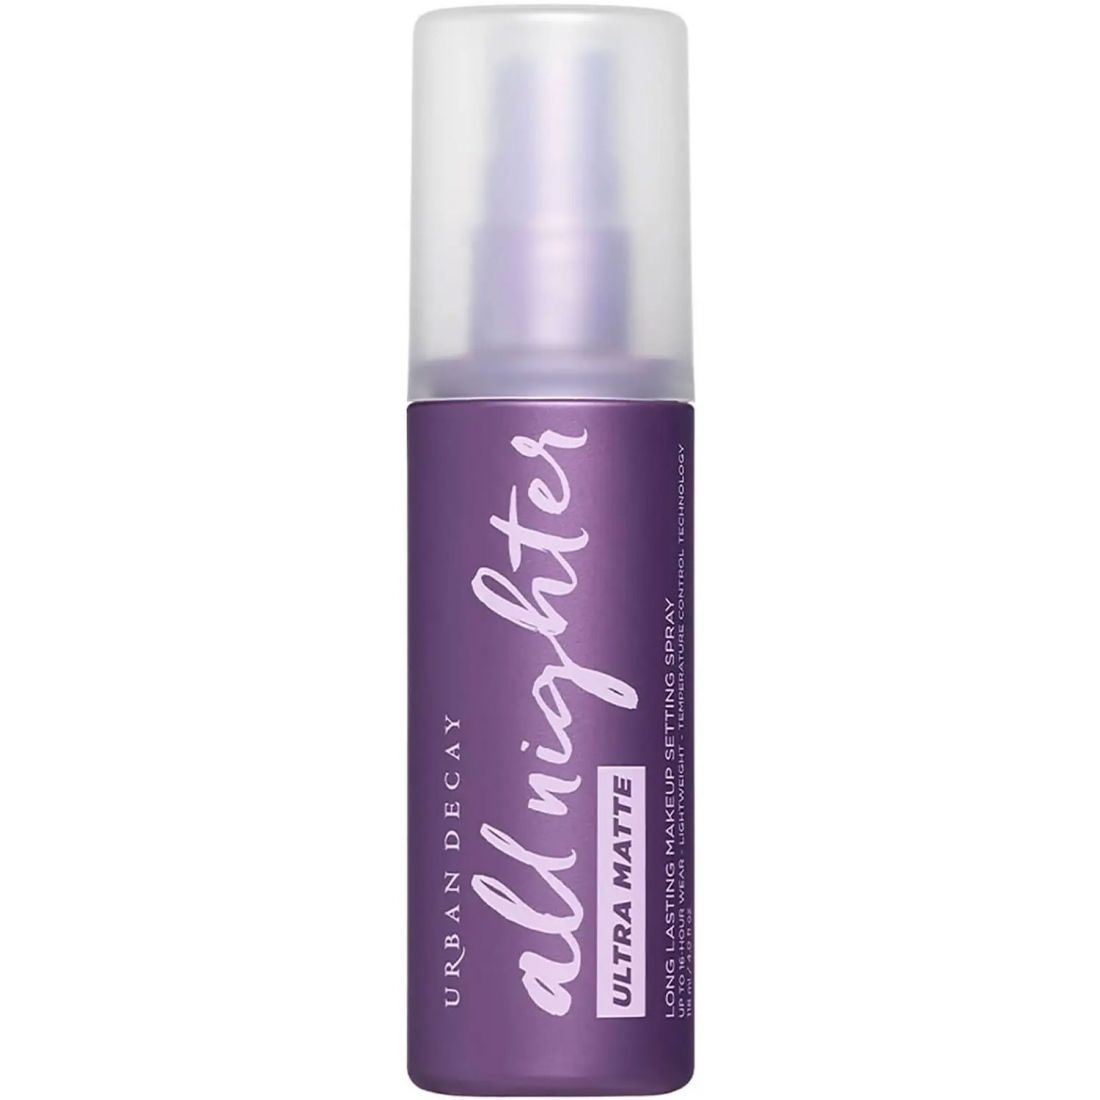 Urban Decay - Spray fixateur de maquillage 'All Nighter Ultra Matte Long Lasting' - 118 ml